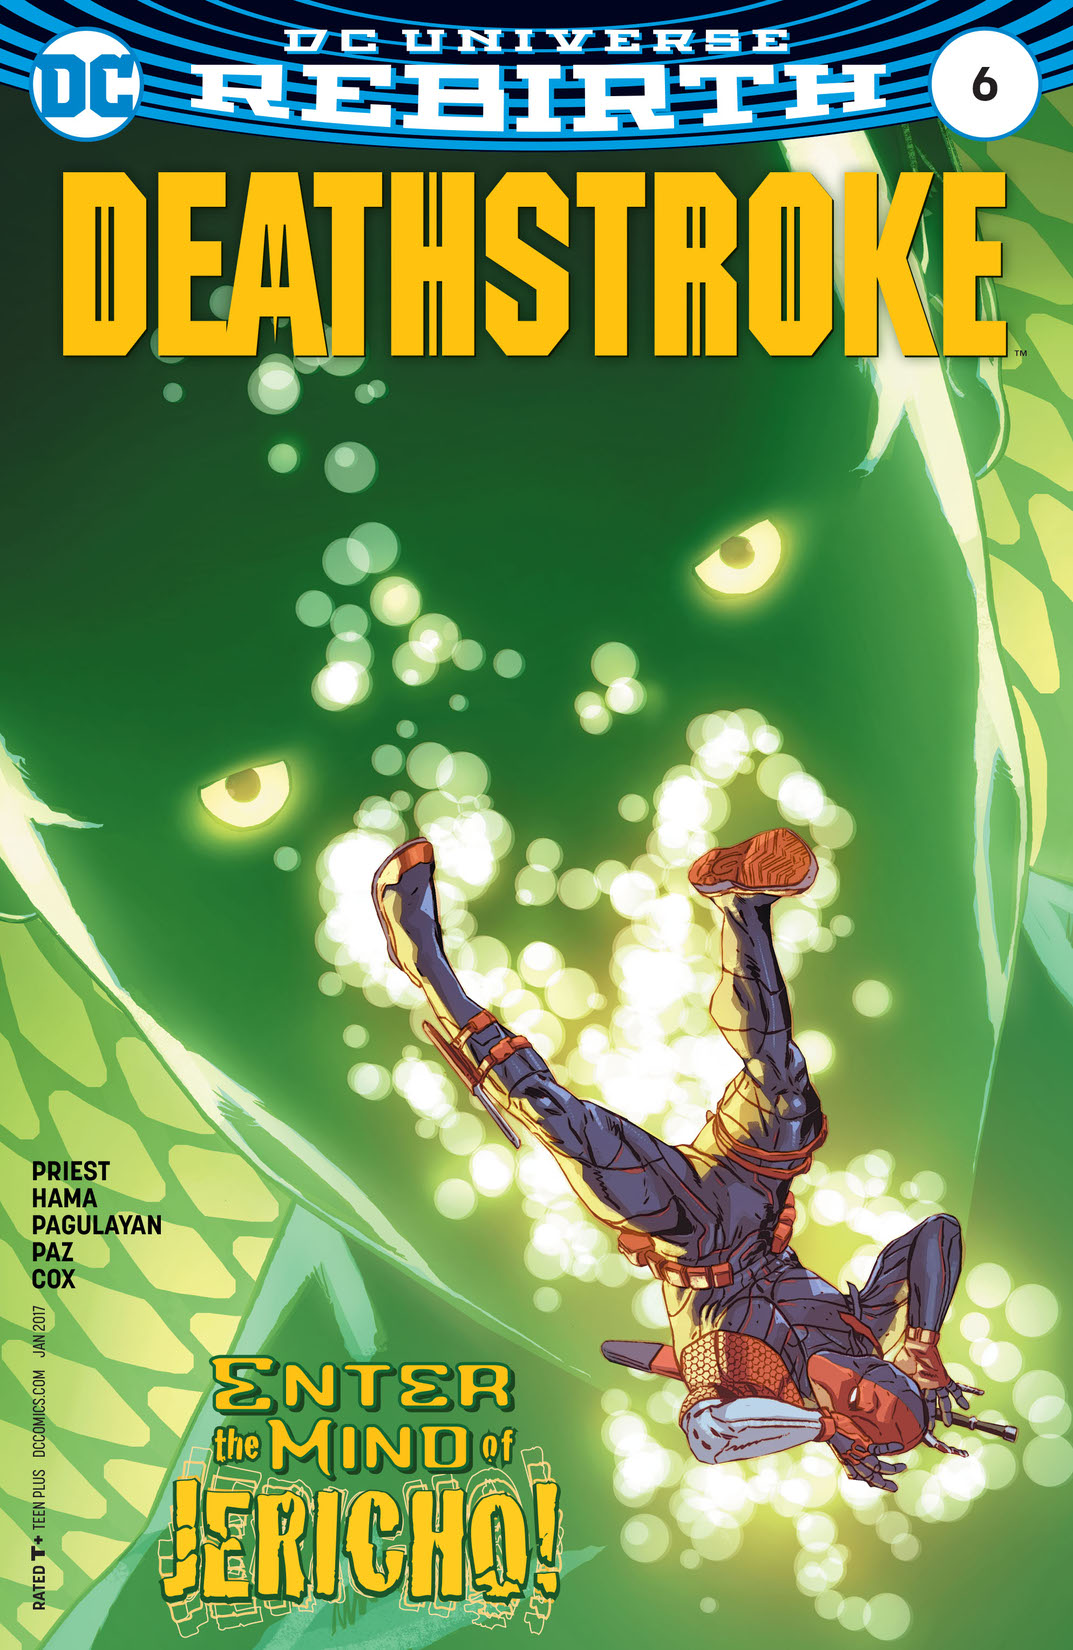 Deathstroke (2016-) #6 preview images